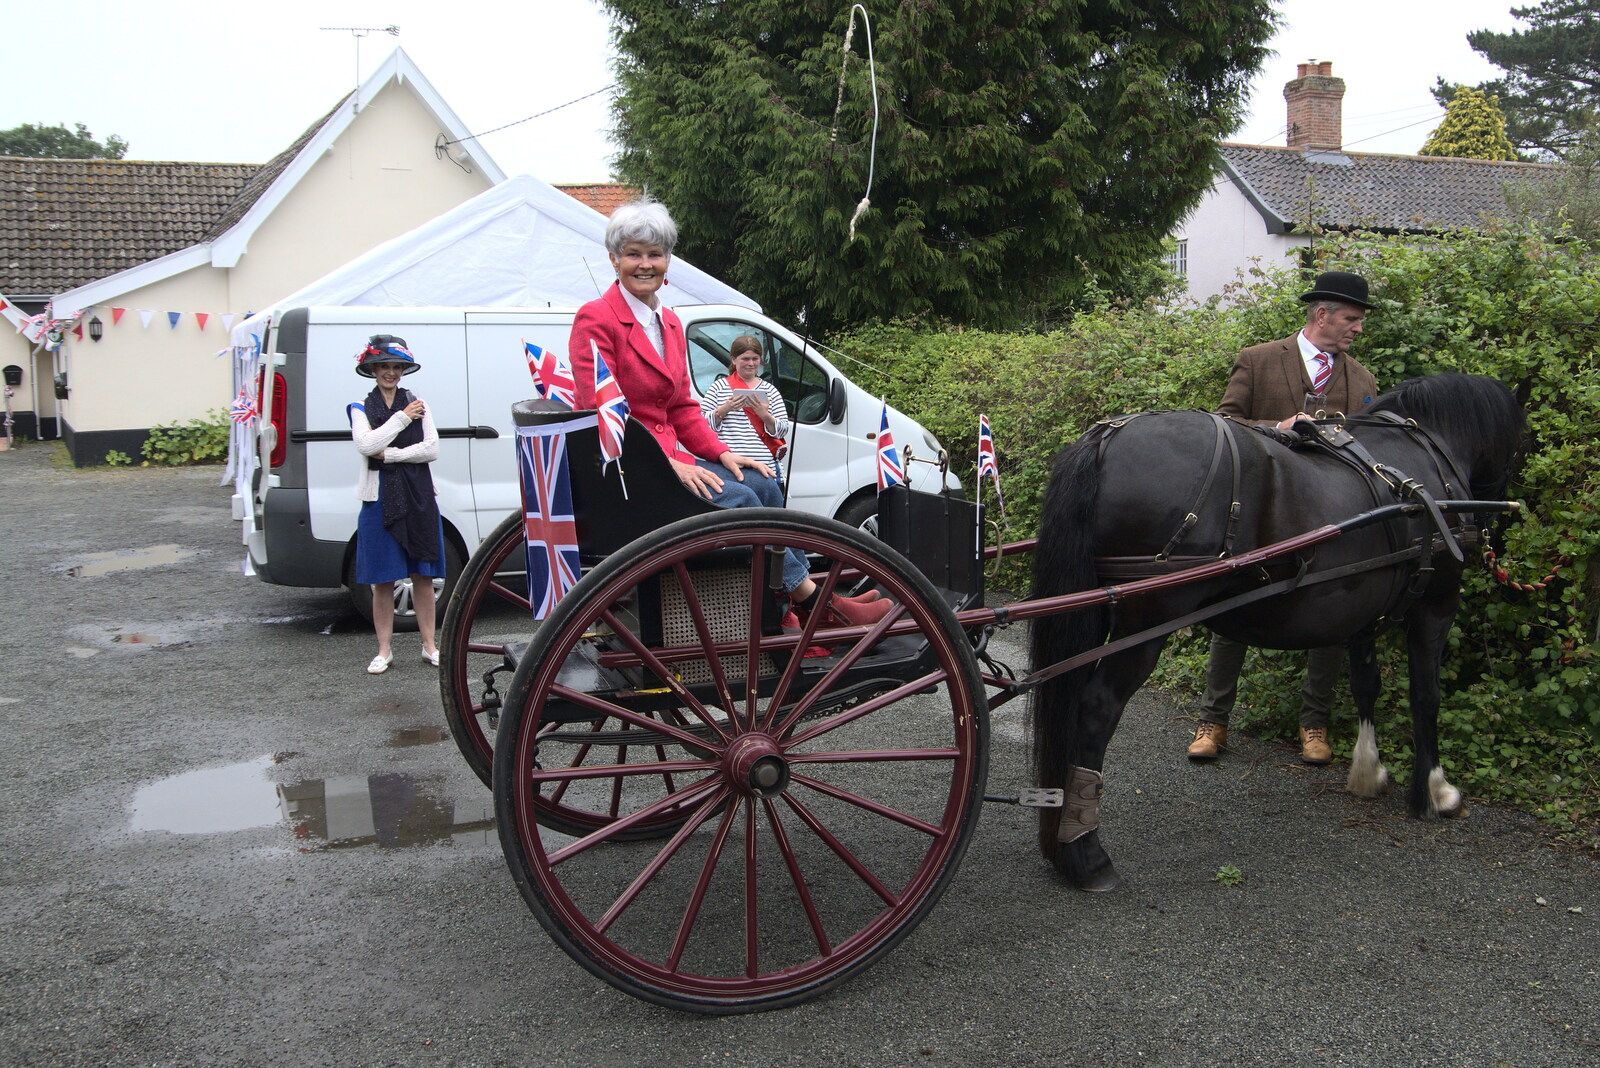 Platinum Jubilee Sunday in Palgrave, Brome and Coney Weston - 5th June 2022: The buggy gets some visitors for a try out